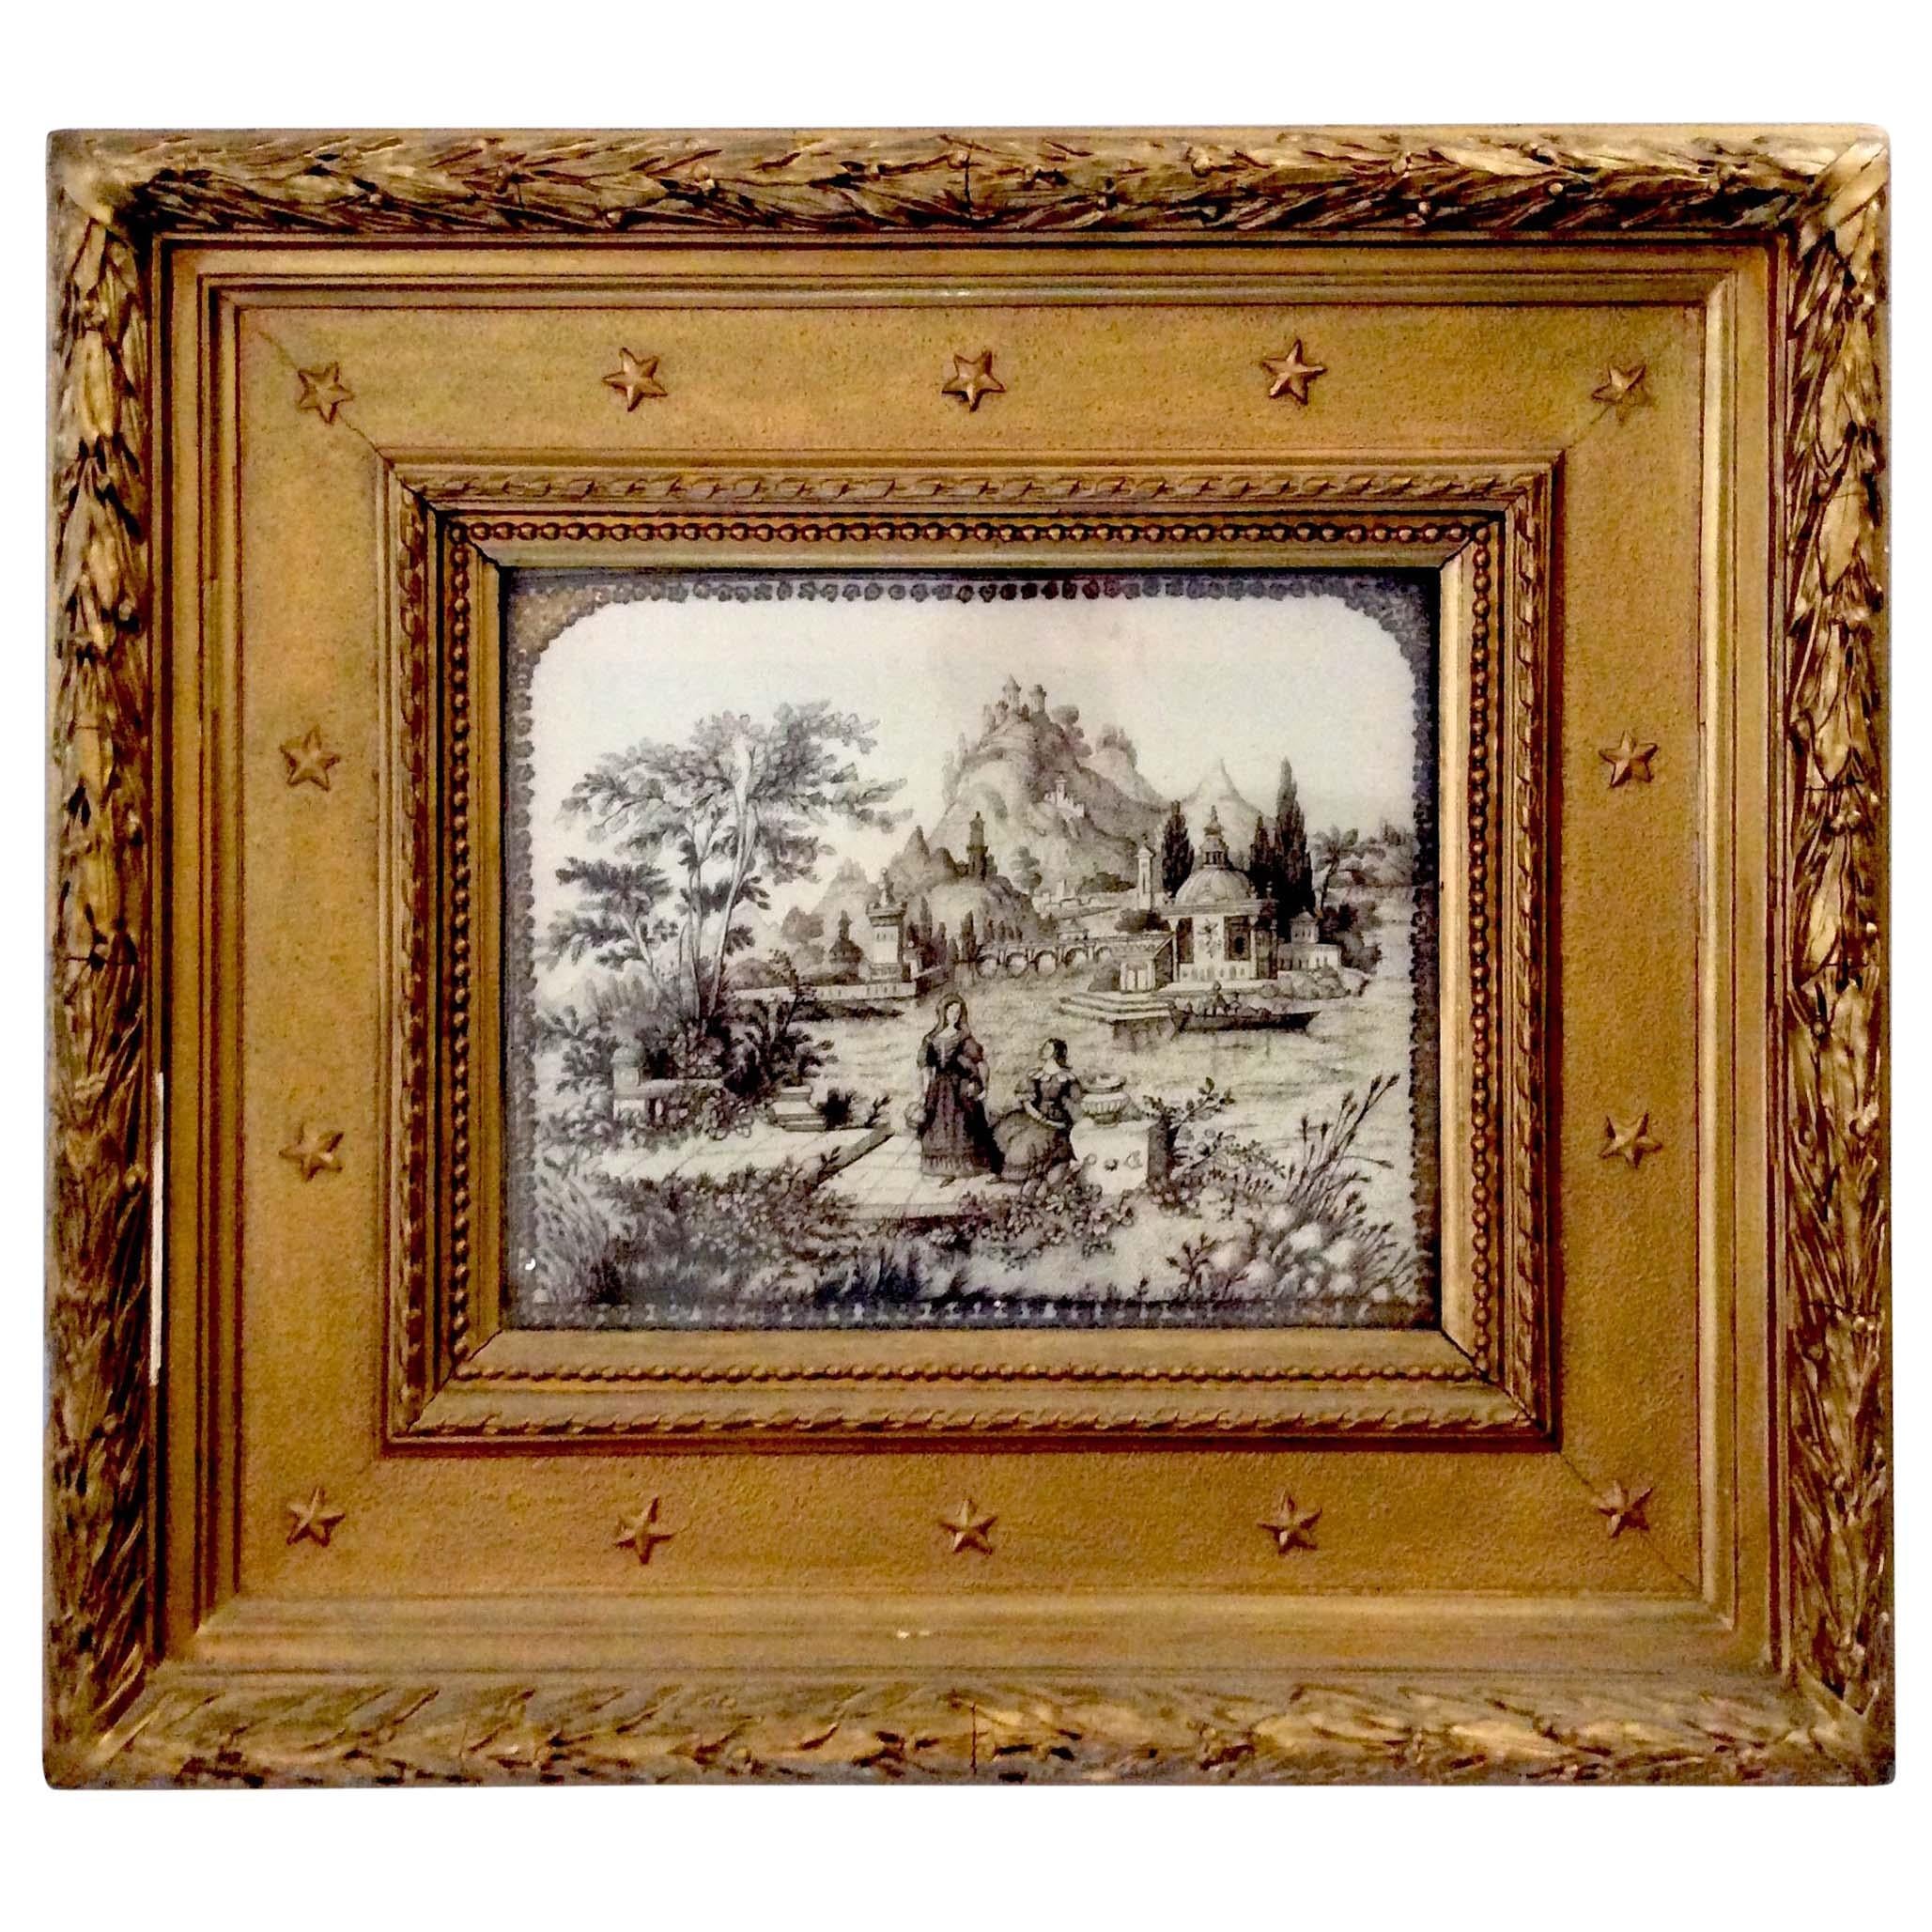 Antique Embroidered Italian Pastoral Scenic Framed Panel in Human Hair